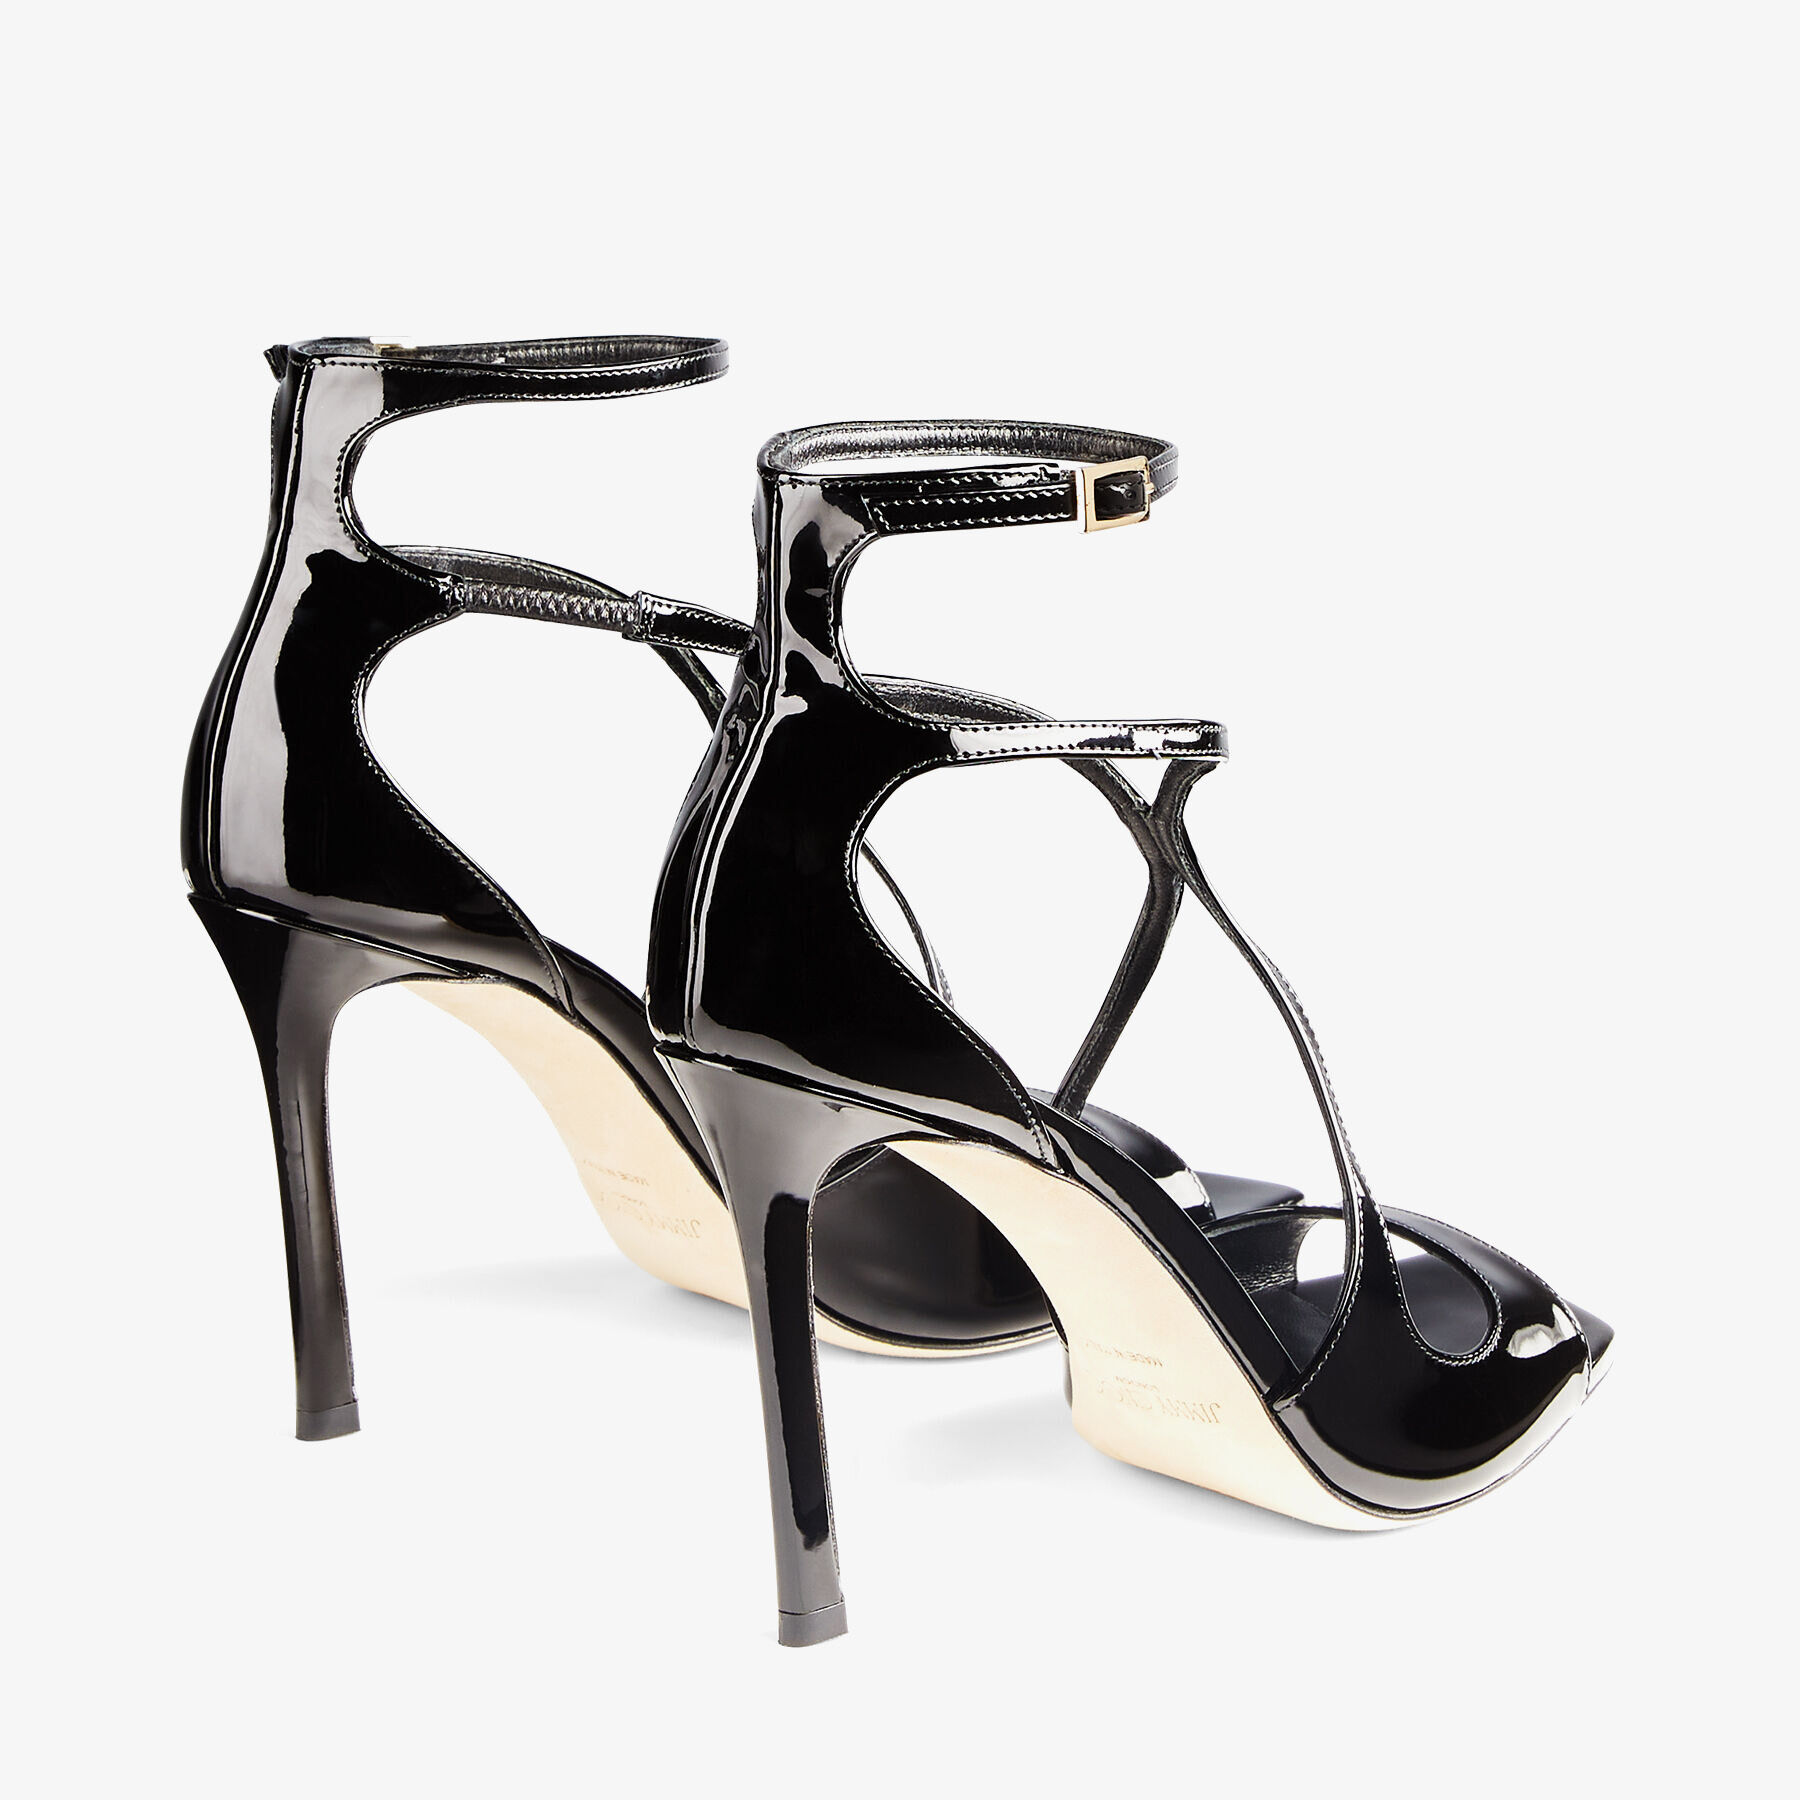 Jimmy Choo Sandals for Women sale - discounted price | FASHIOLA INDIA